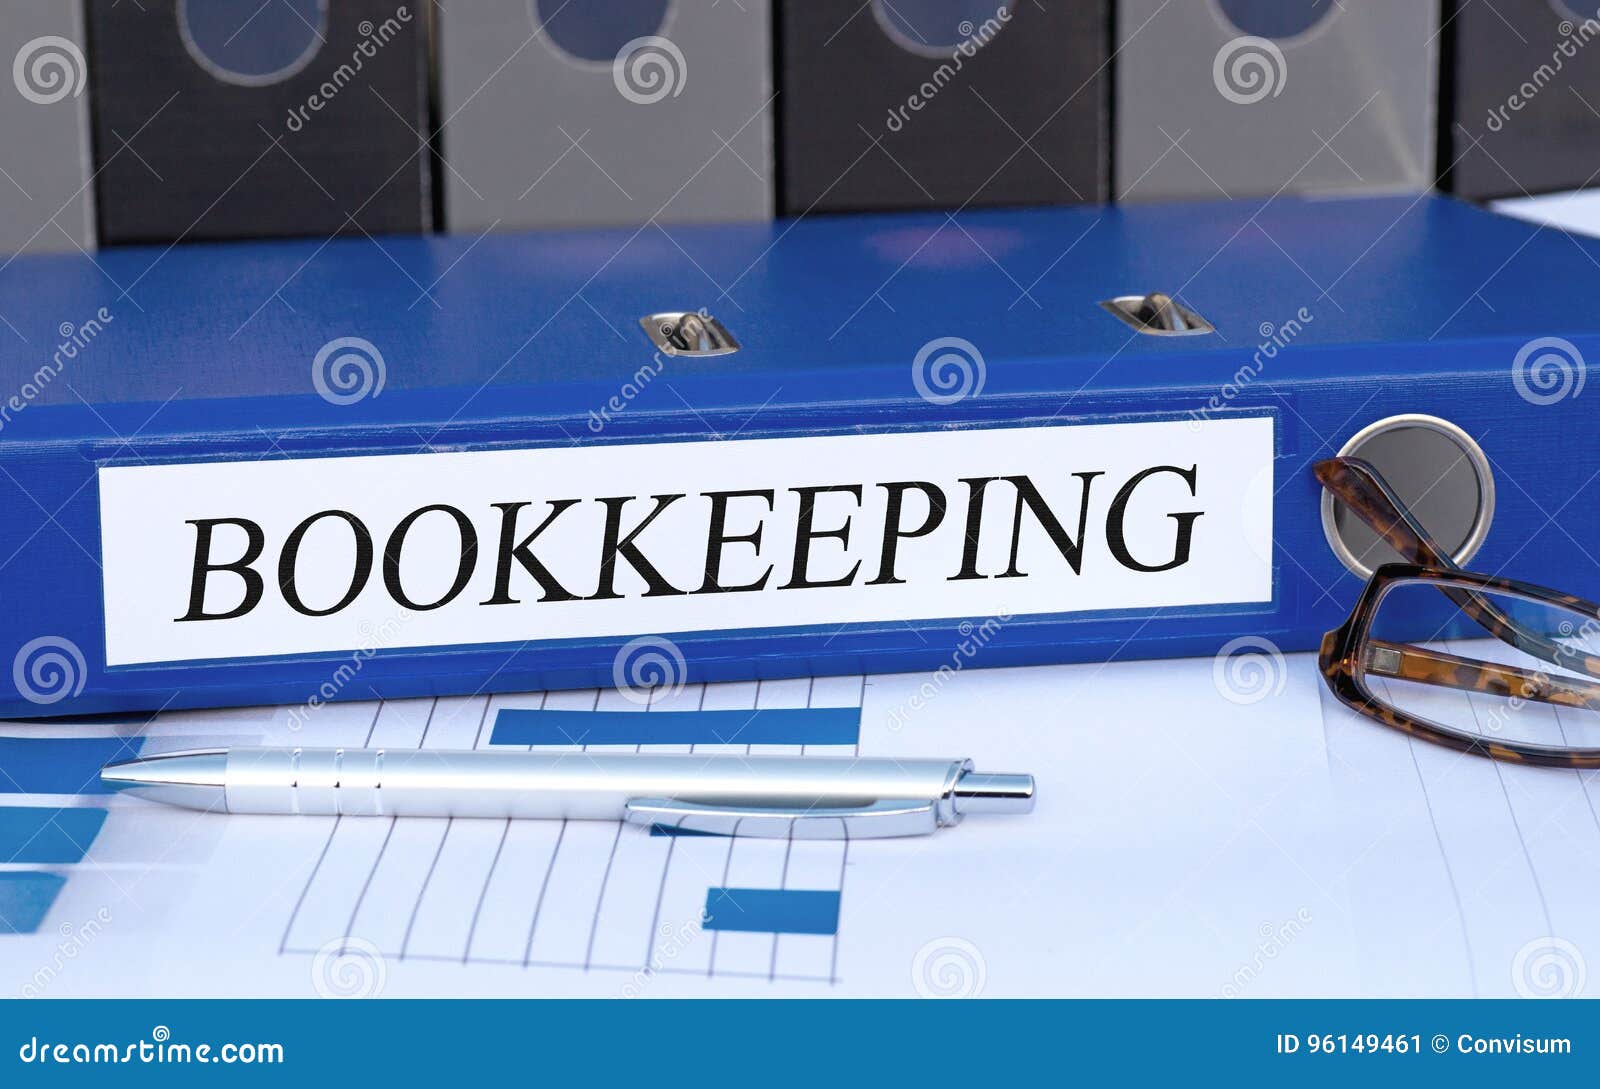 bookkeeping - blue binder with text in the office